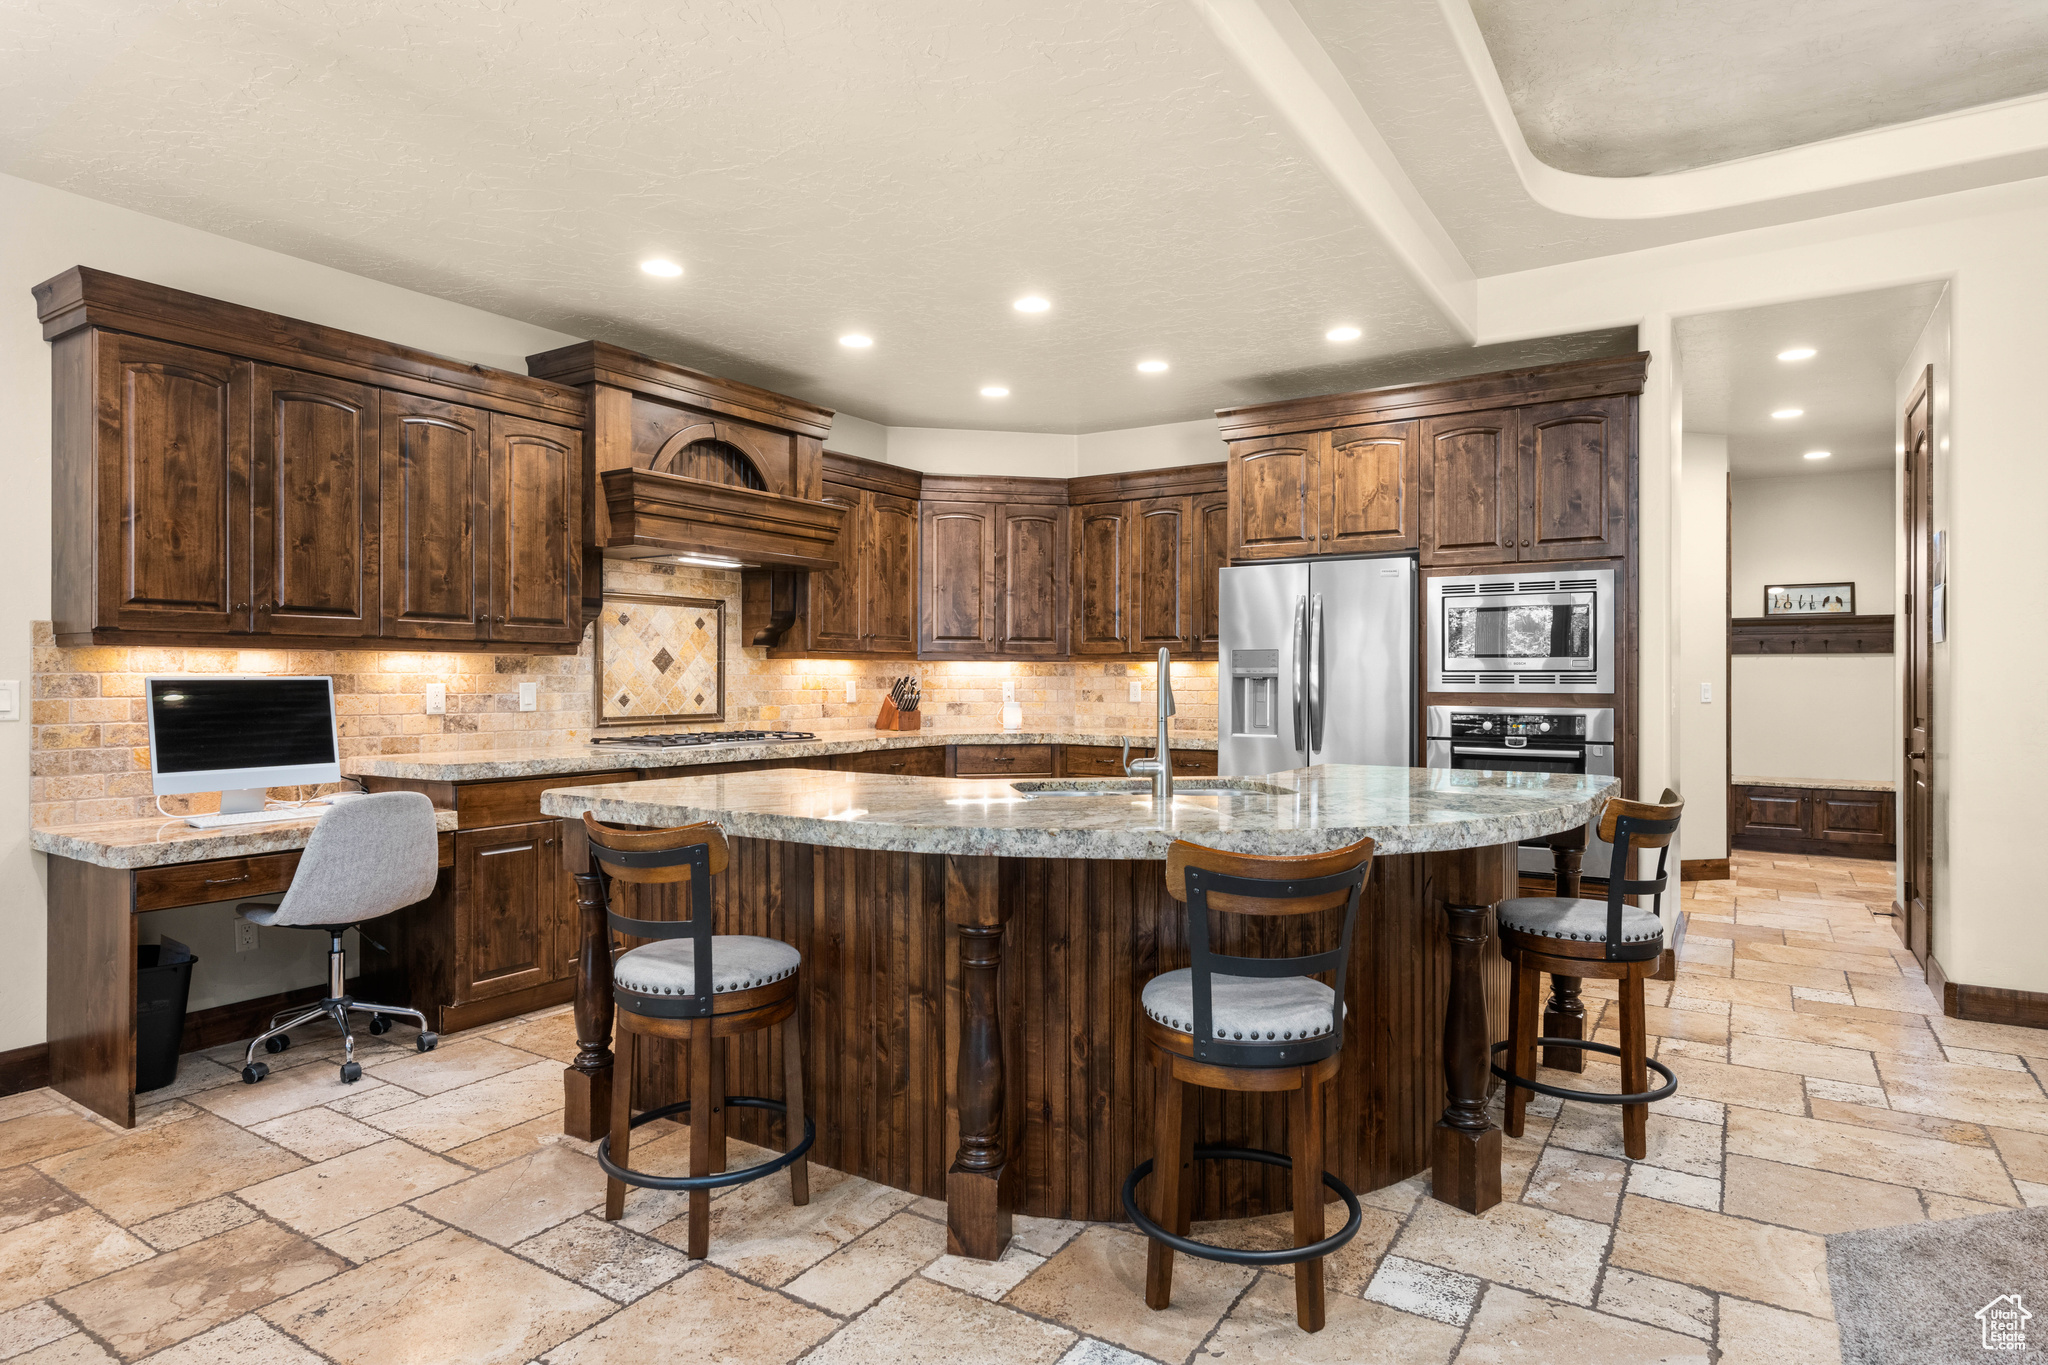 Kitchen featuring light tile flooring, backsplash, appliances with stainless steel finishes, a center island with sink, and light stone counters